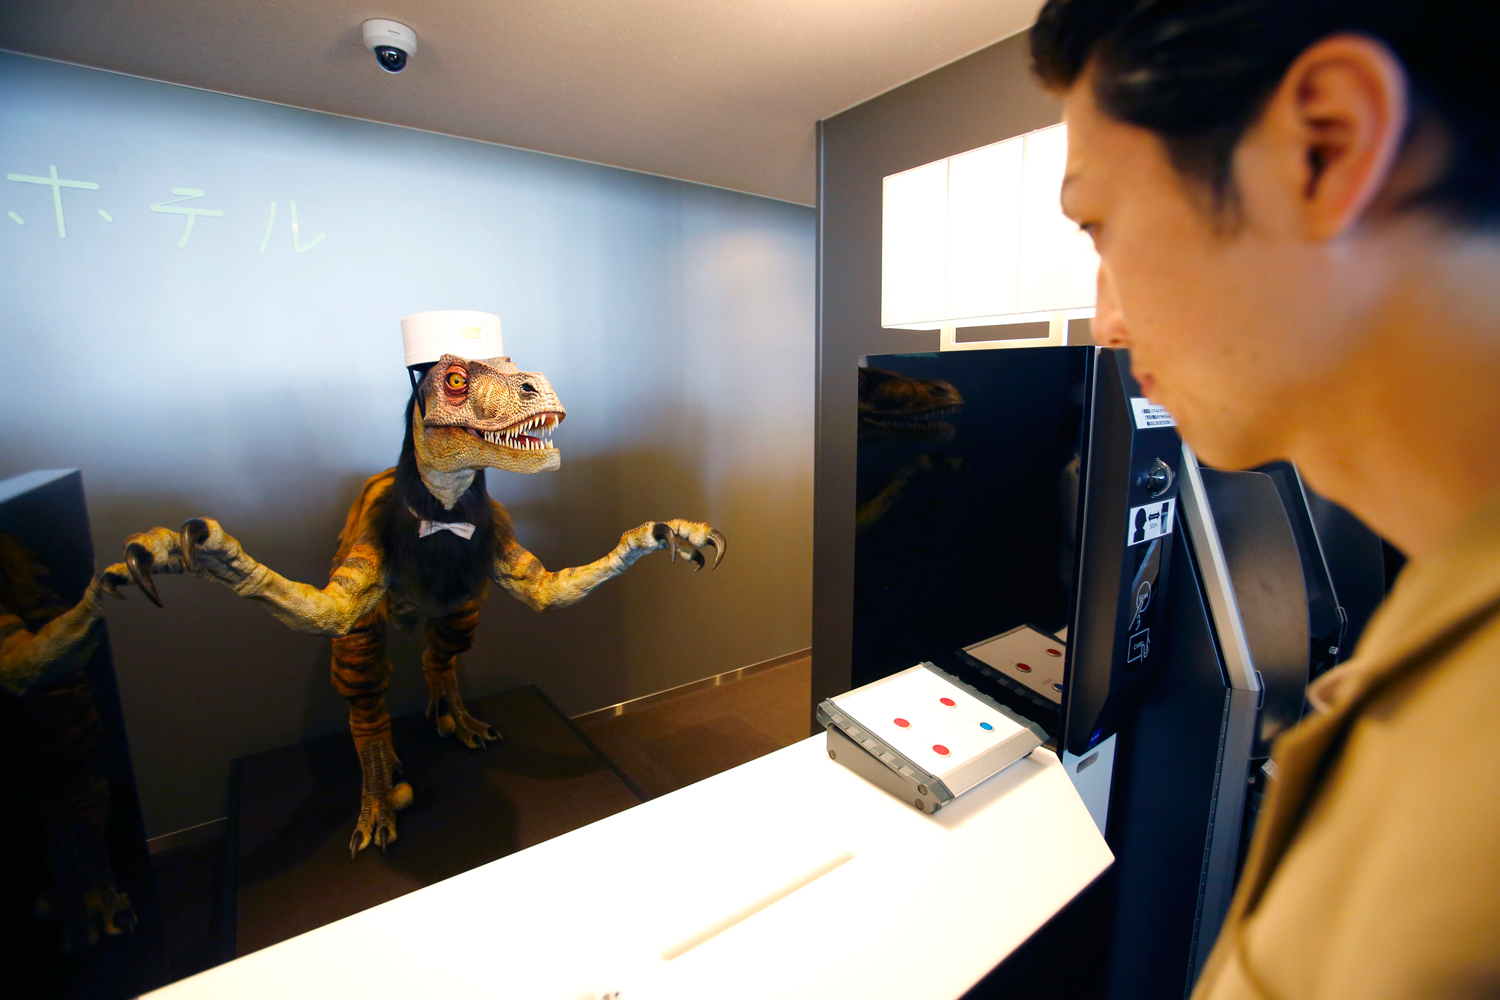 A receptionist dinosaur robot greets a hotel employee demonstrating how to check in for the media at the new hotel, aptly called Henn na Hotel or Weird Hotel, in Sasebo, southwestern Japan, July 15, 2015. (Shizuo Kambayashi—AP)